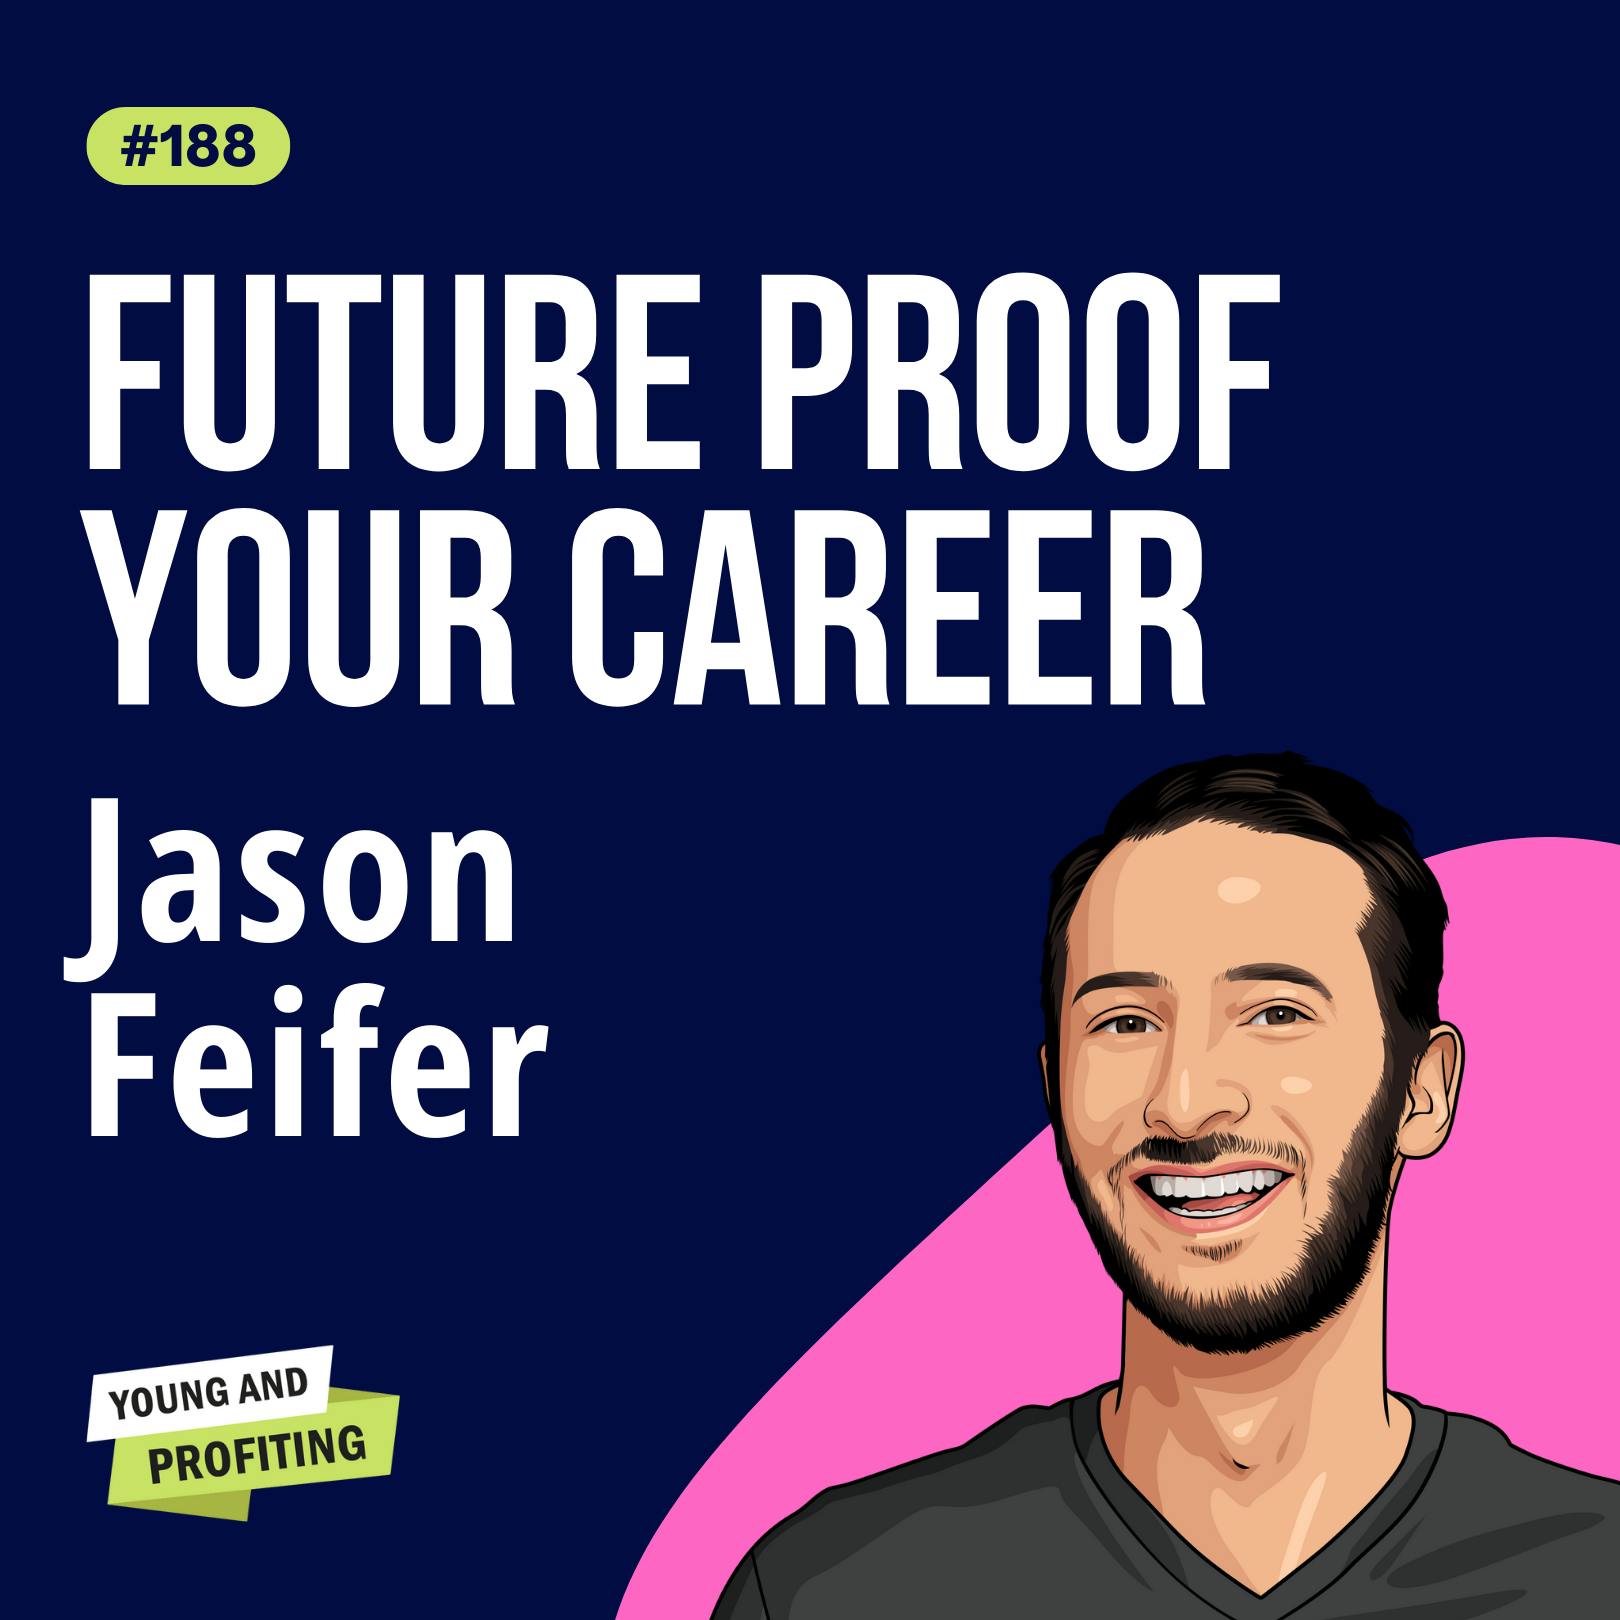 Jason Feifer: Future-Proof Your Career and Unlock Opportunities with the Entrepreneur's Mindset | E188 by Hala Taha | YAP Media Network